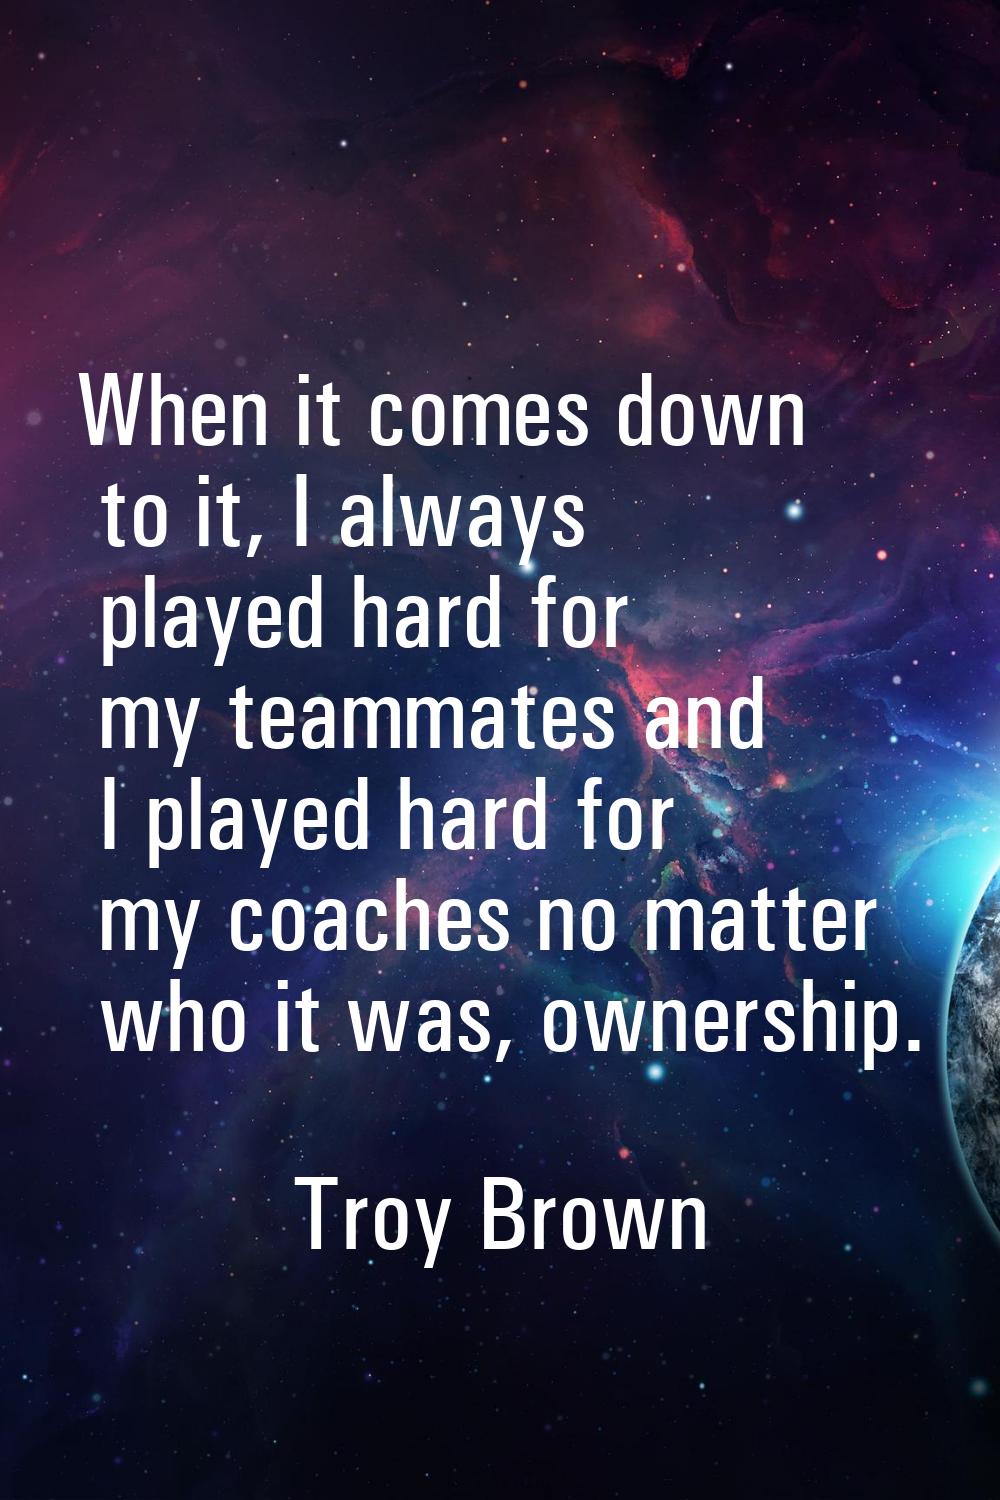 When it comes down to it, I always played hard for my teammates and I played hard for my coaches no